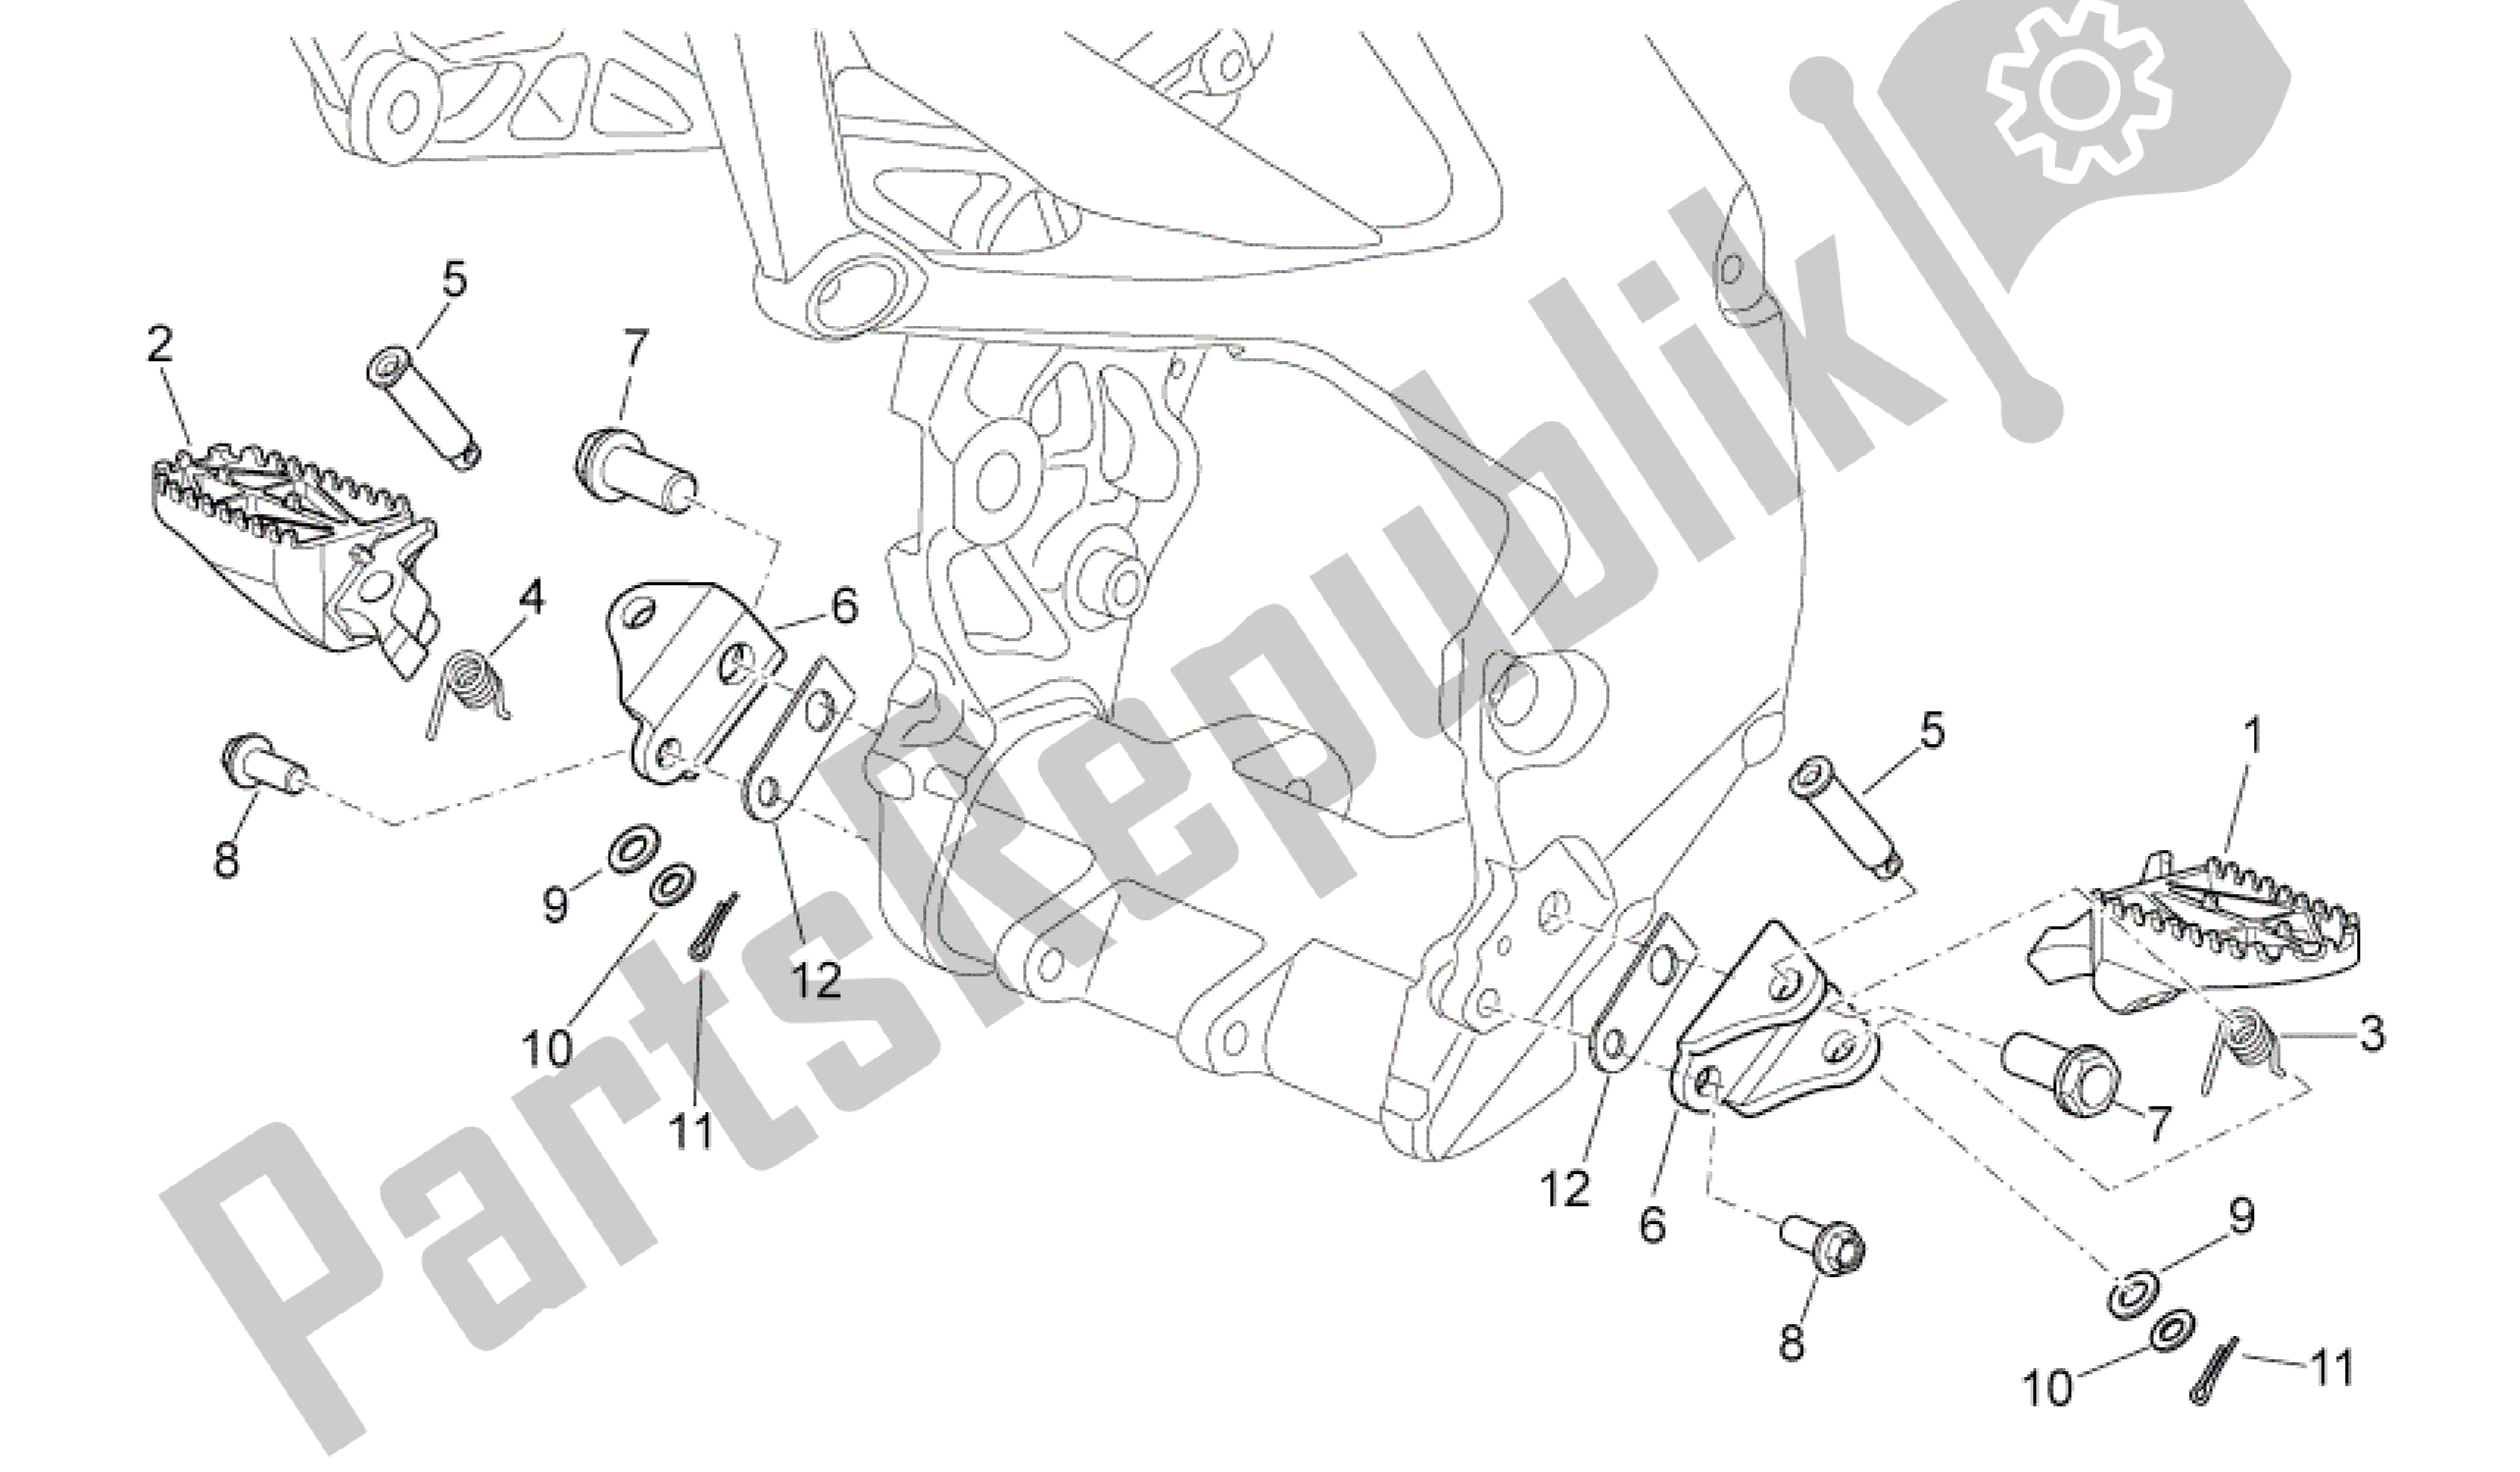 All parts for the Foot Rests of the Aprilia RXV 450 2009 - 2011